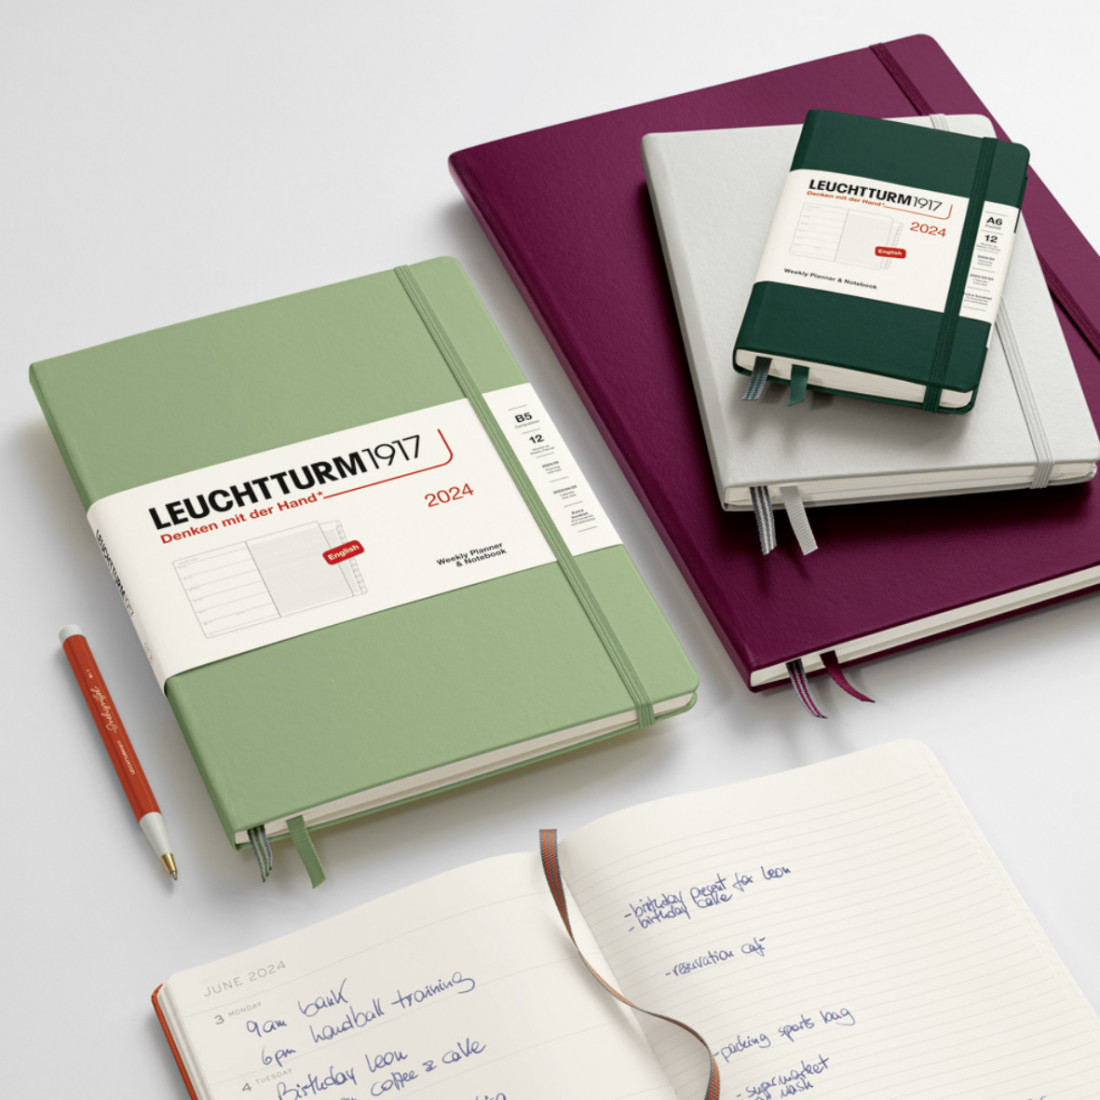 Leuchtturm 1917 Weekly Planner and Notebook 2024 Port Red Medium A5 Hard Cover